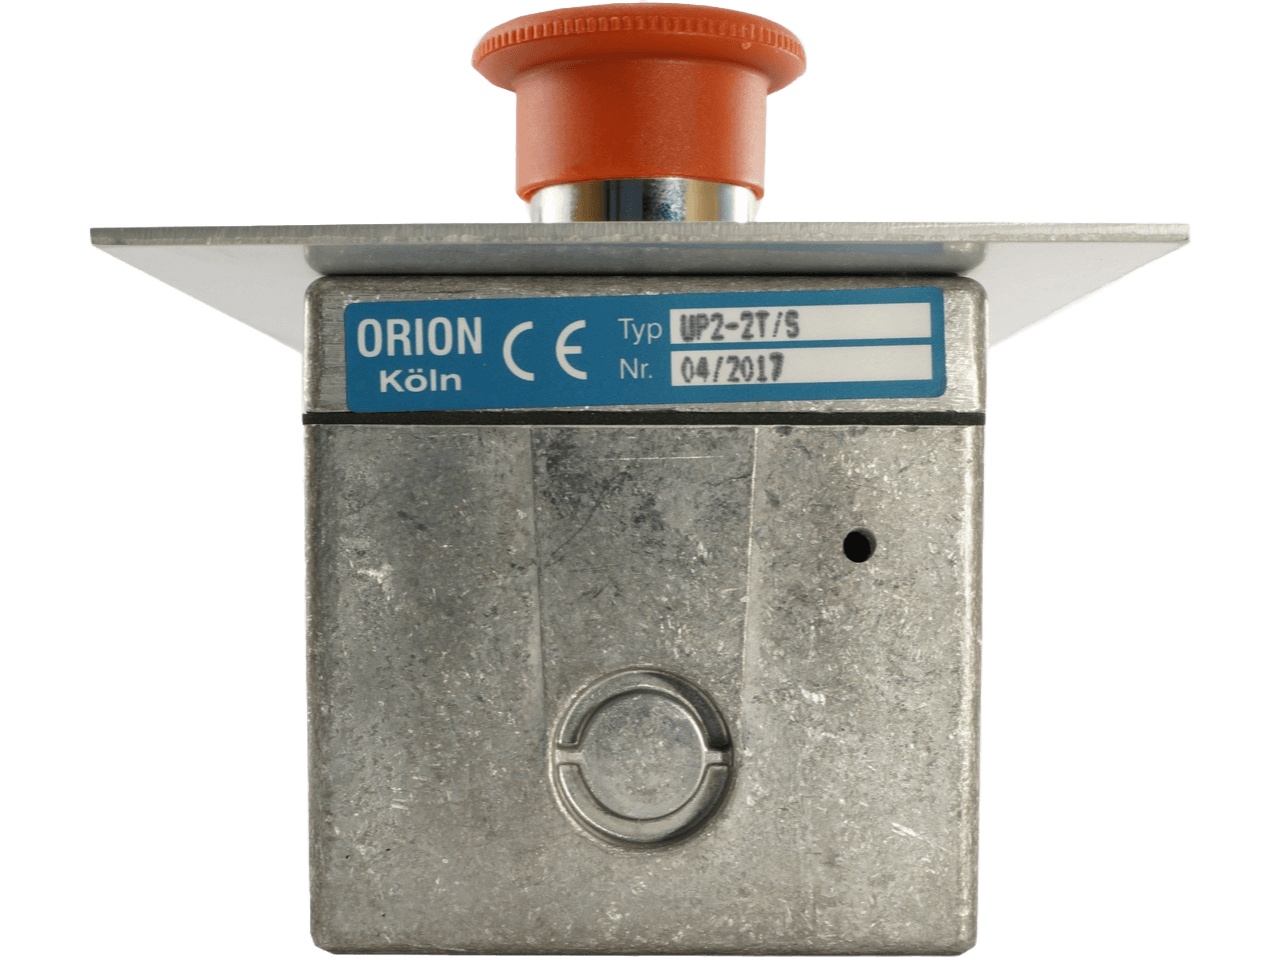 Orion UP 2-2T/S Key-Switch Flush-Mount 2-Direction with Emergency Stop